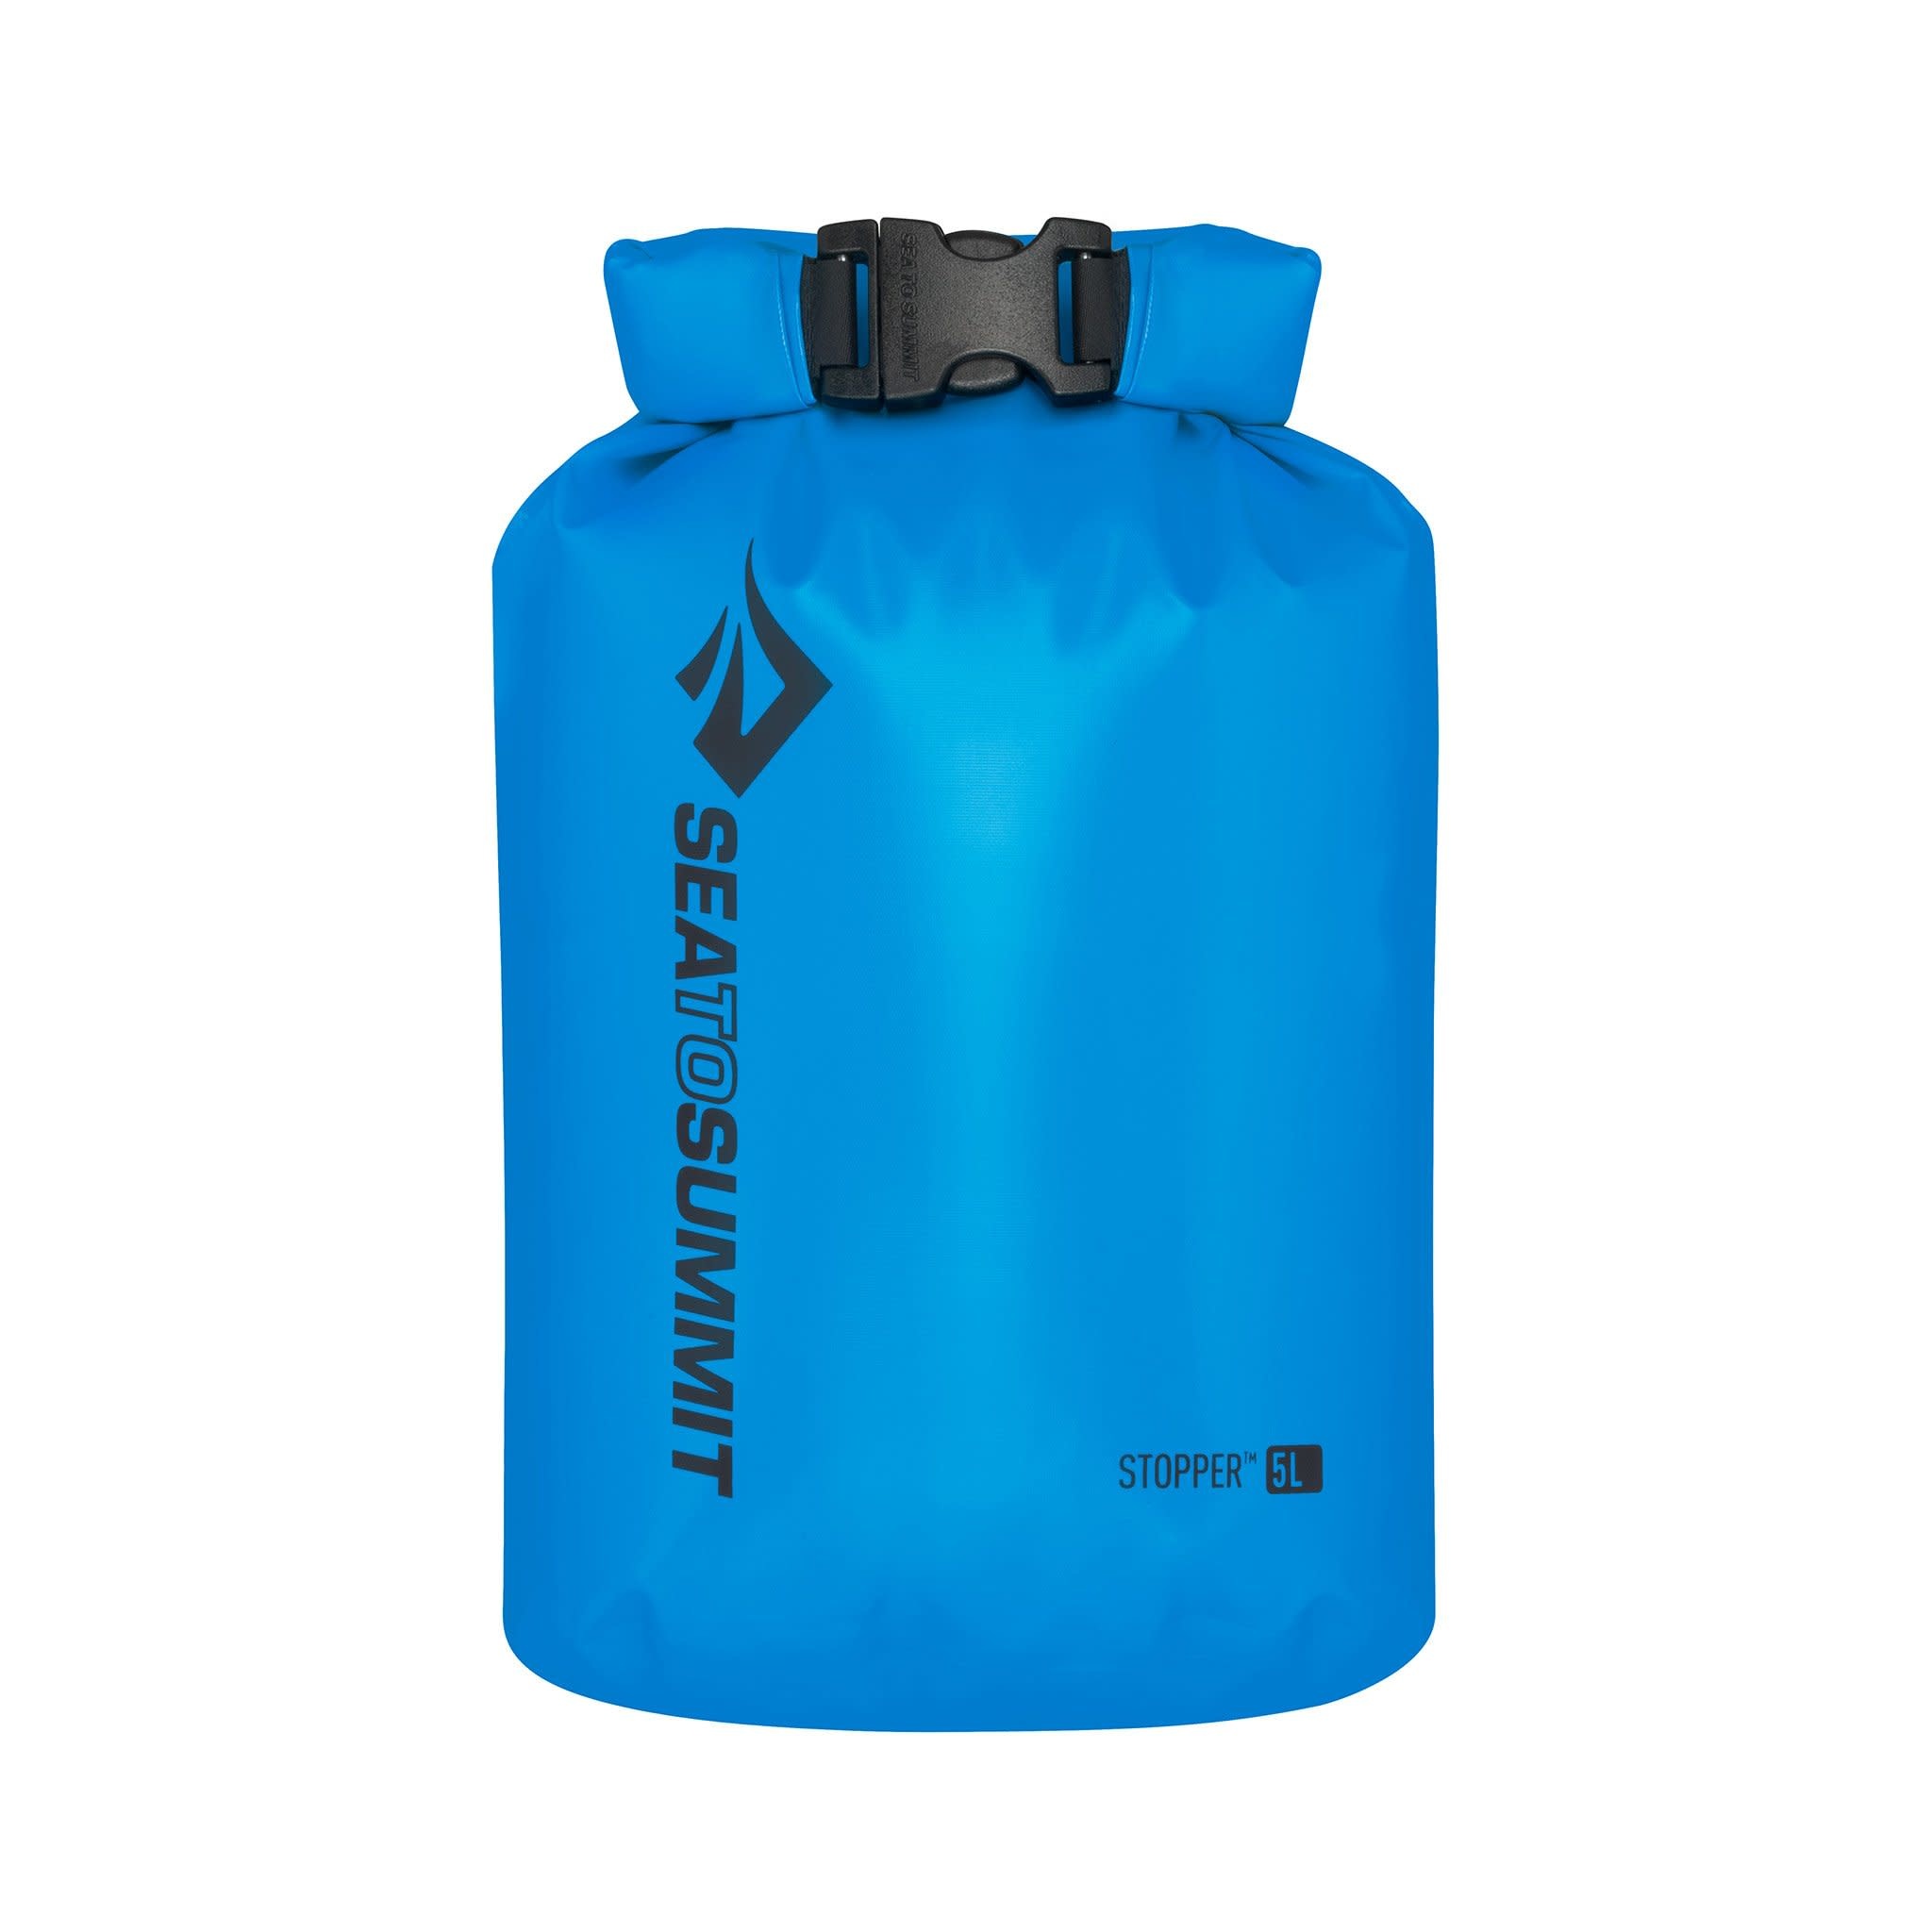 SEA TO SUMMIT Sea to Summit 5L STOPPER DRY BAG